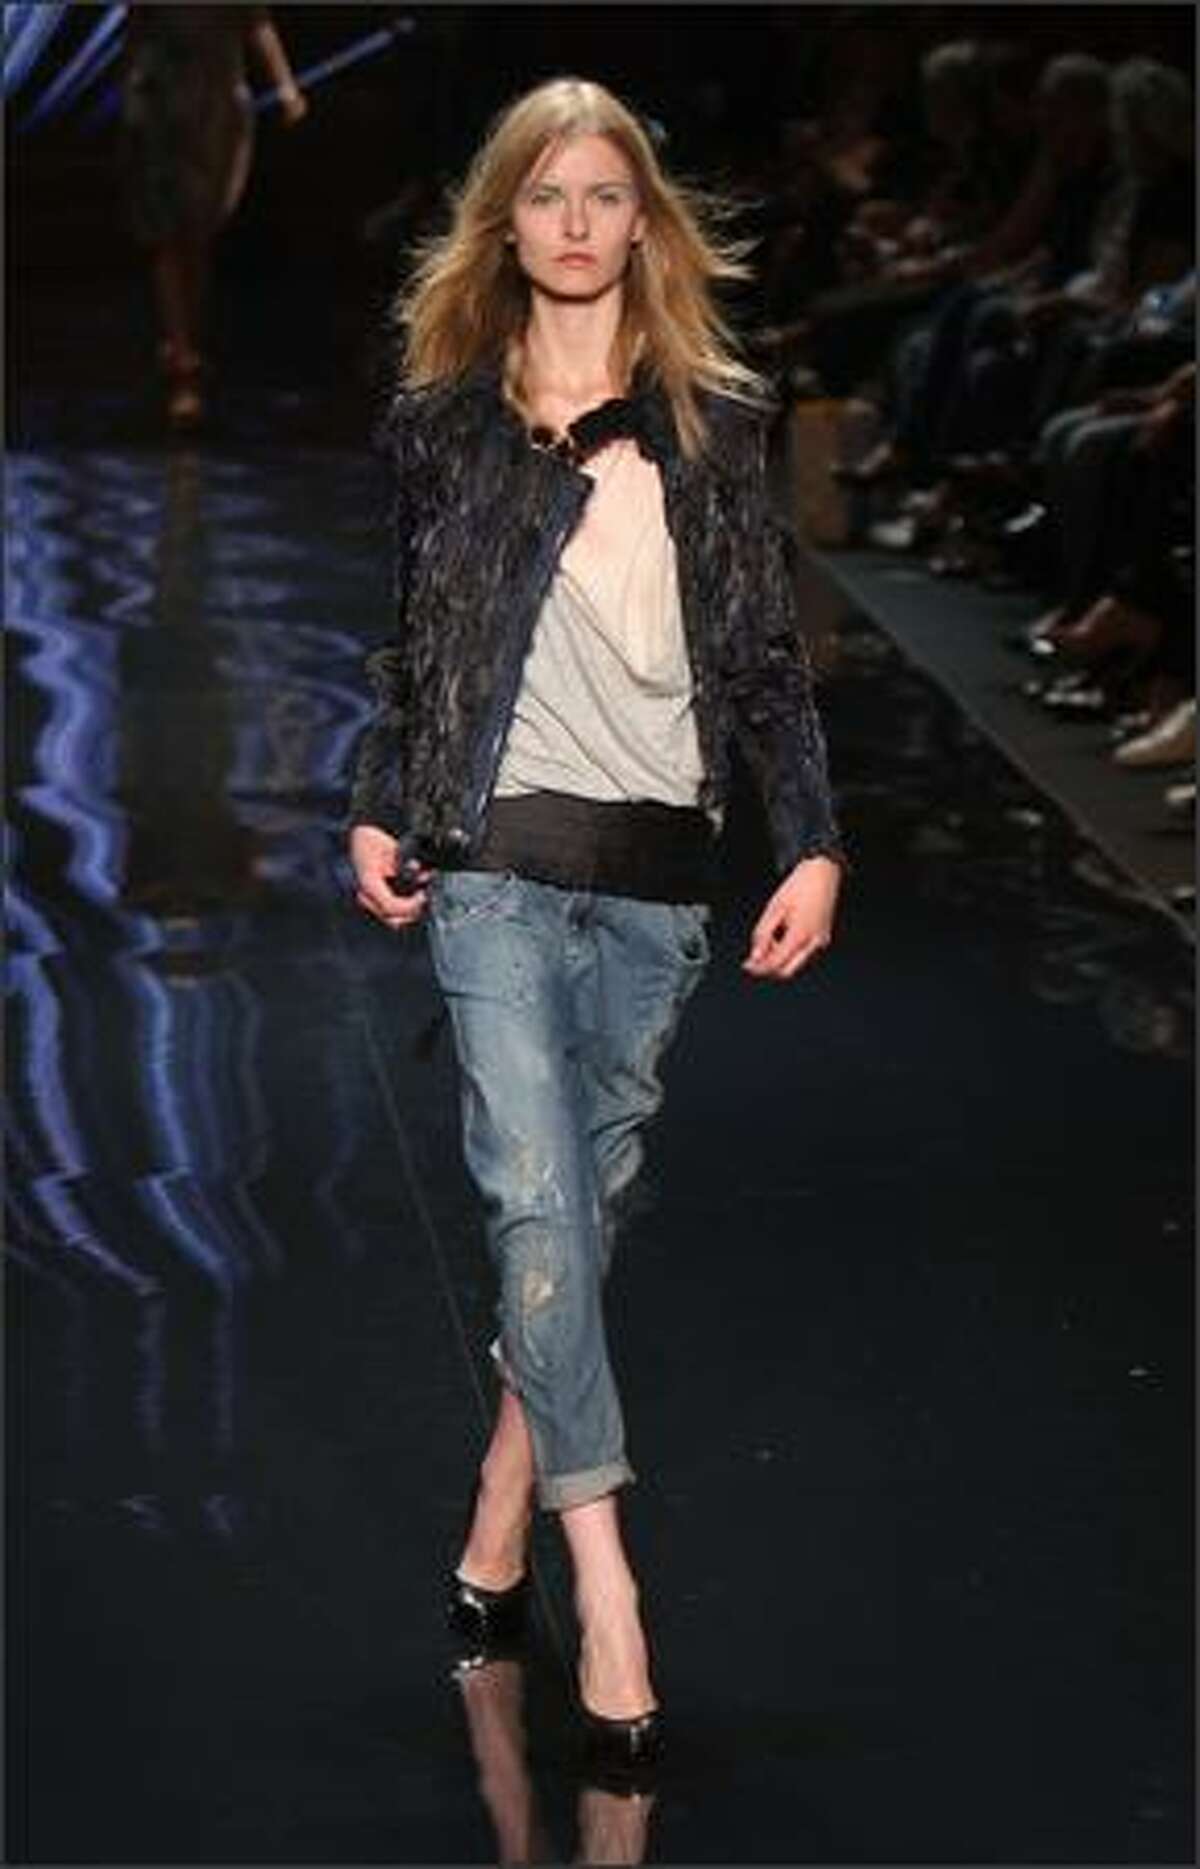 A model walks the runway at the Diesel Spring 2009 fashion show during Mercedes-Benz Fashion Week in New York City.